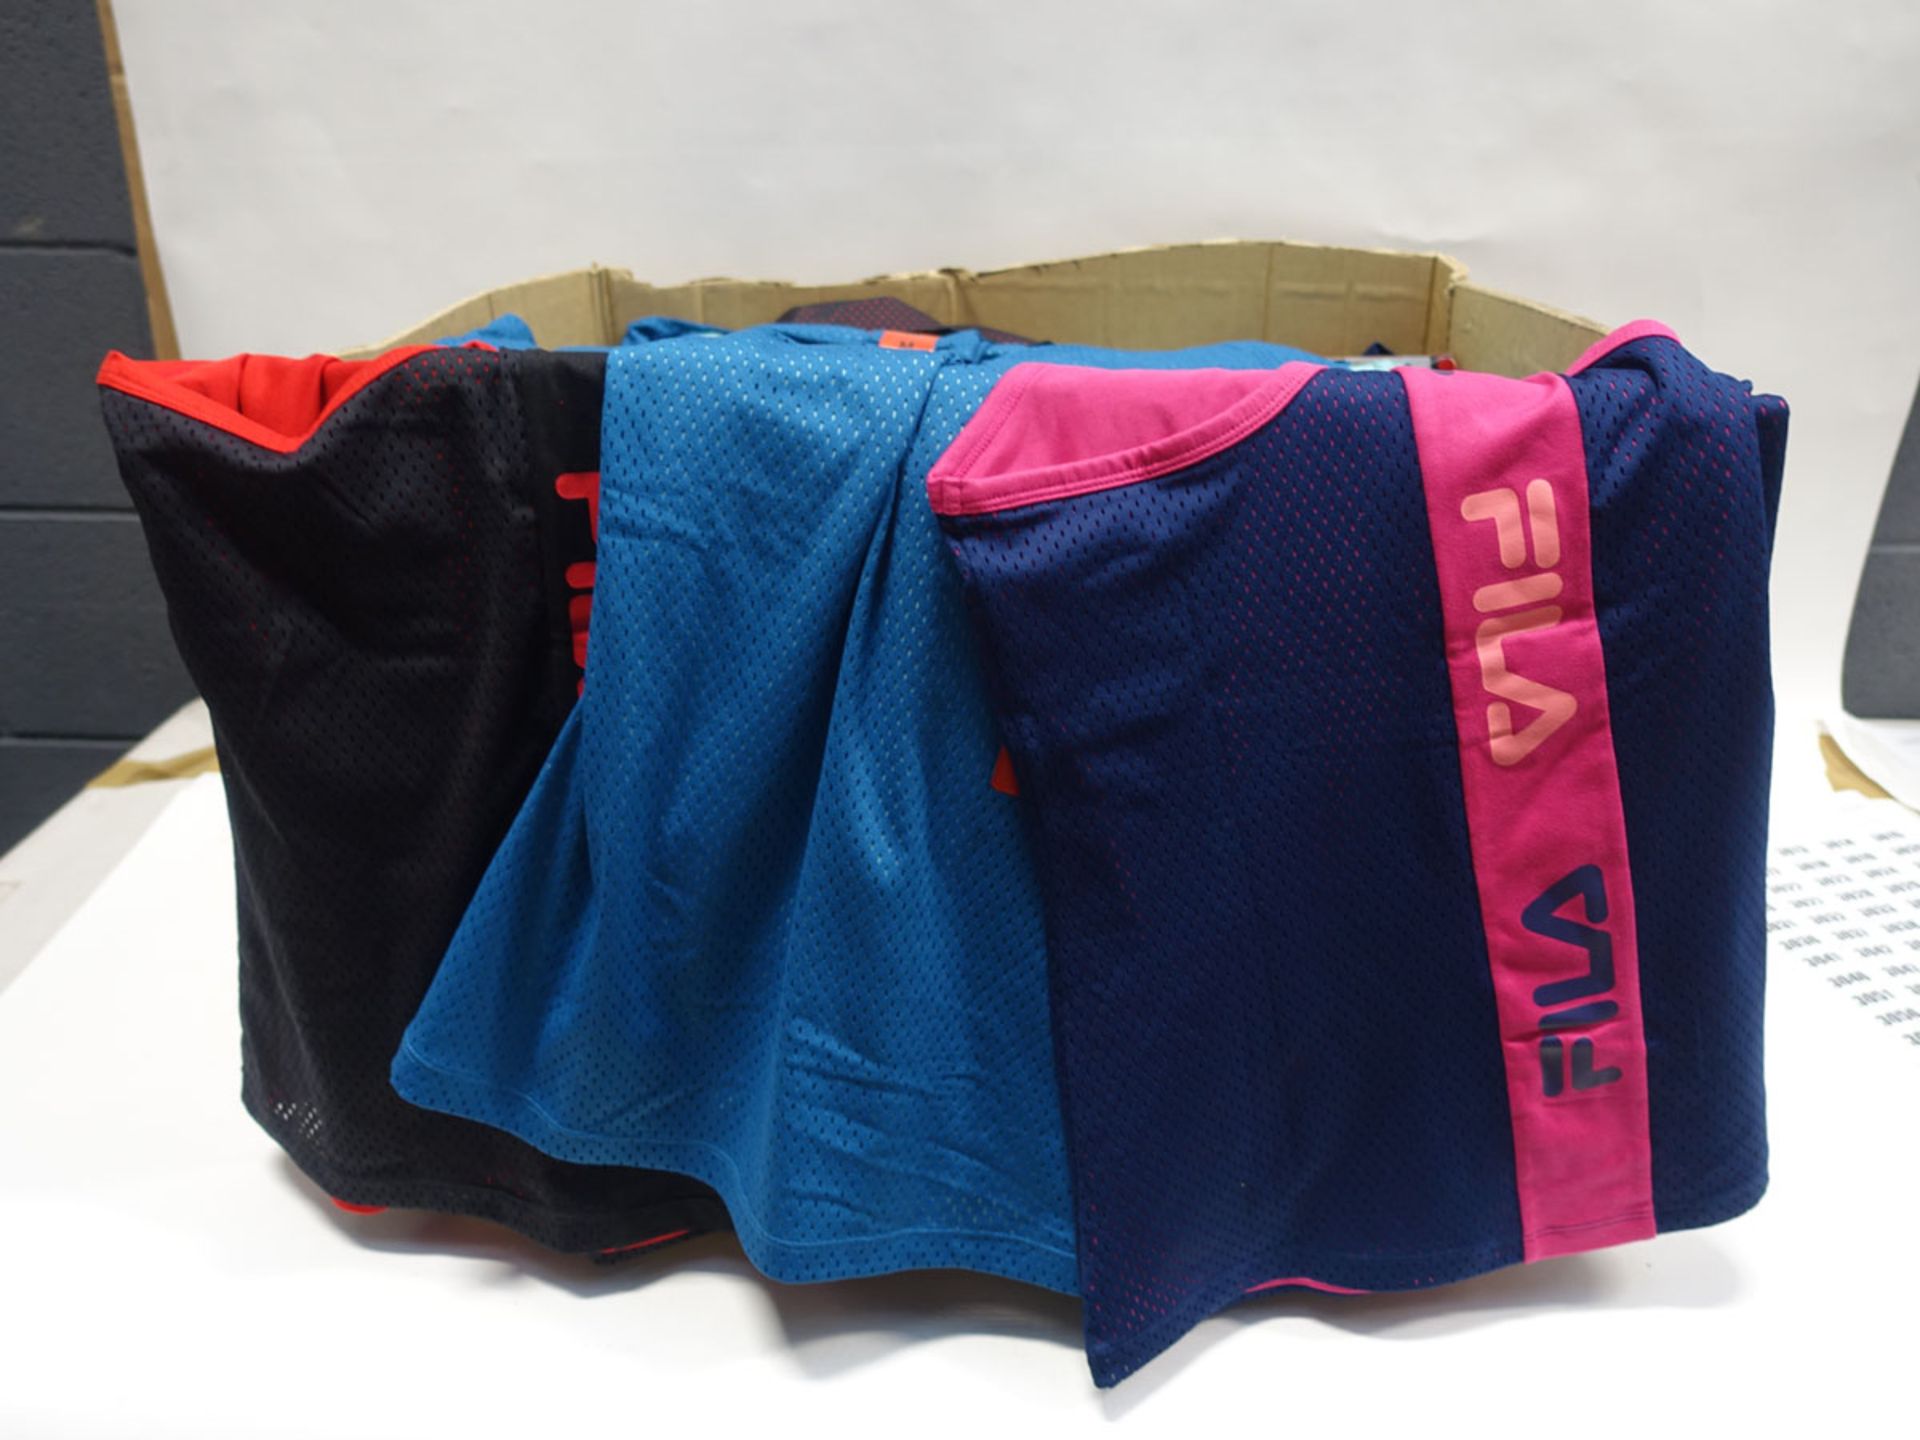 Box containing approx 160 Fila ladies mesh overlay tank tops sizes varying from large to small in - Image 2 of 2